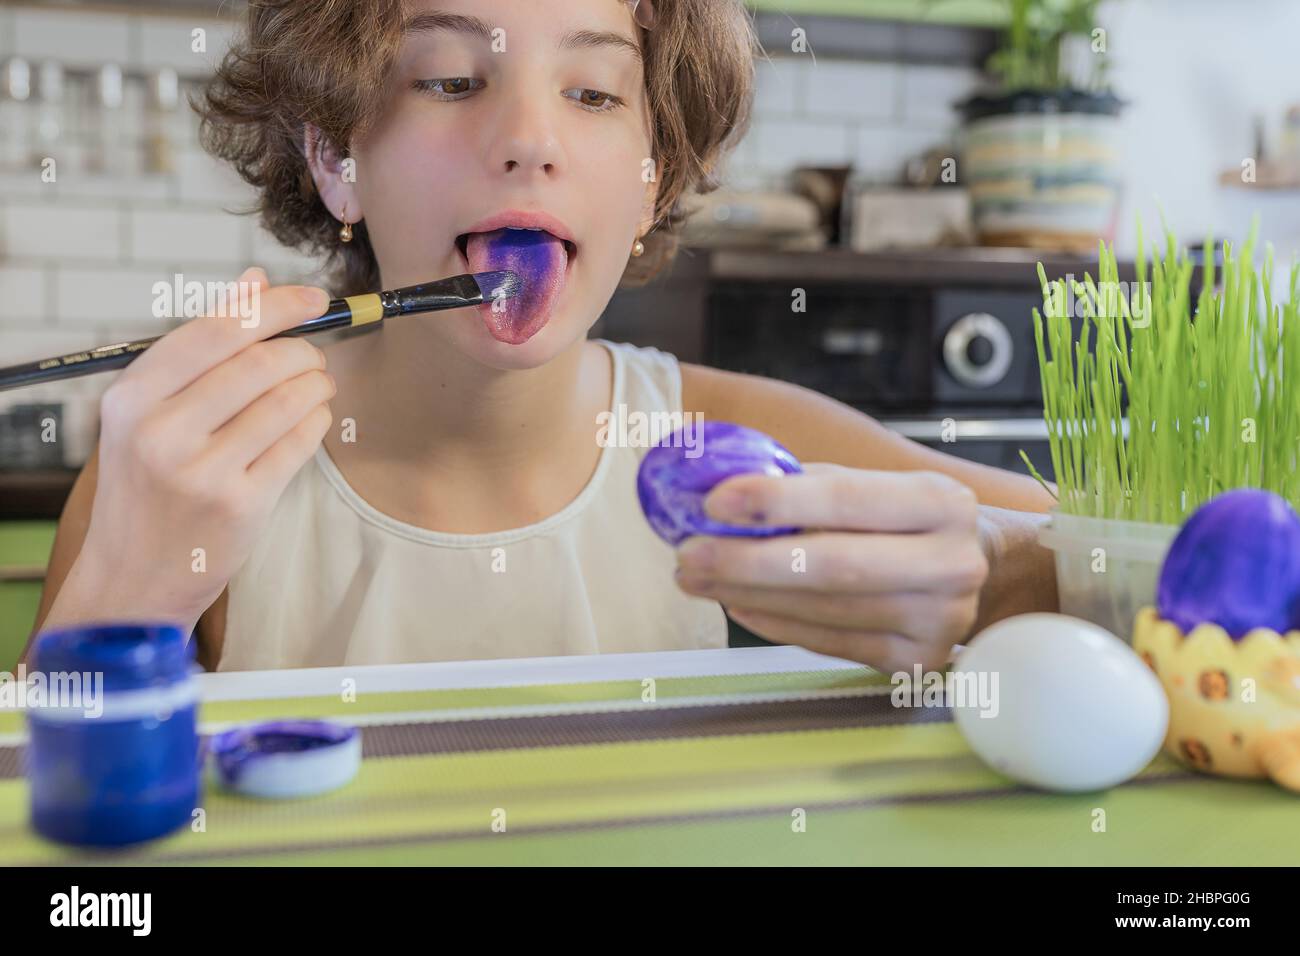 Child girl paints her tongue with food paints. child teenage girl holds an art brush and an Easter egg in her hand. DIY Easter eggs paint. Stock Photo